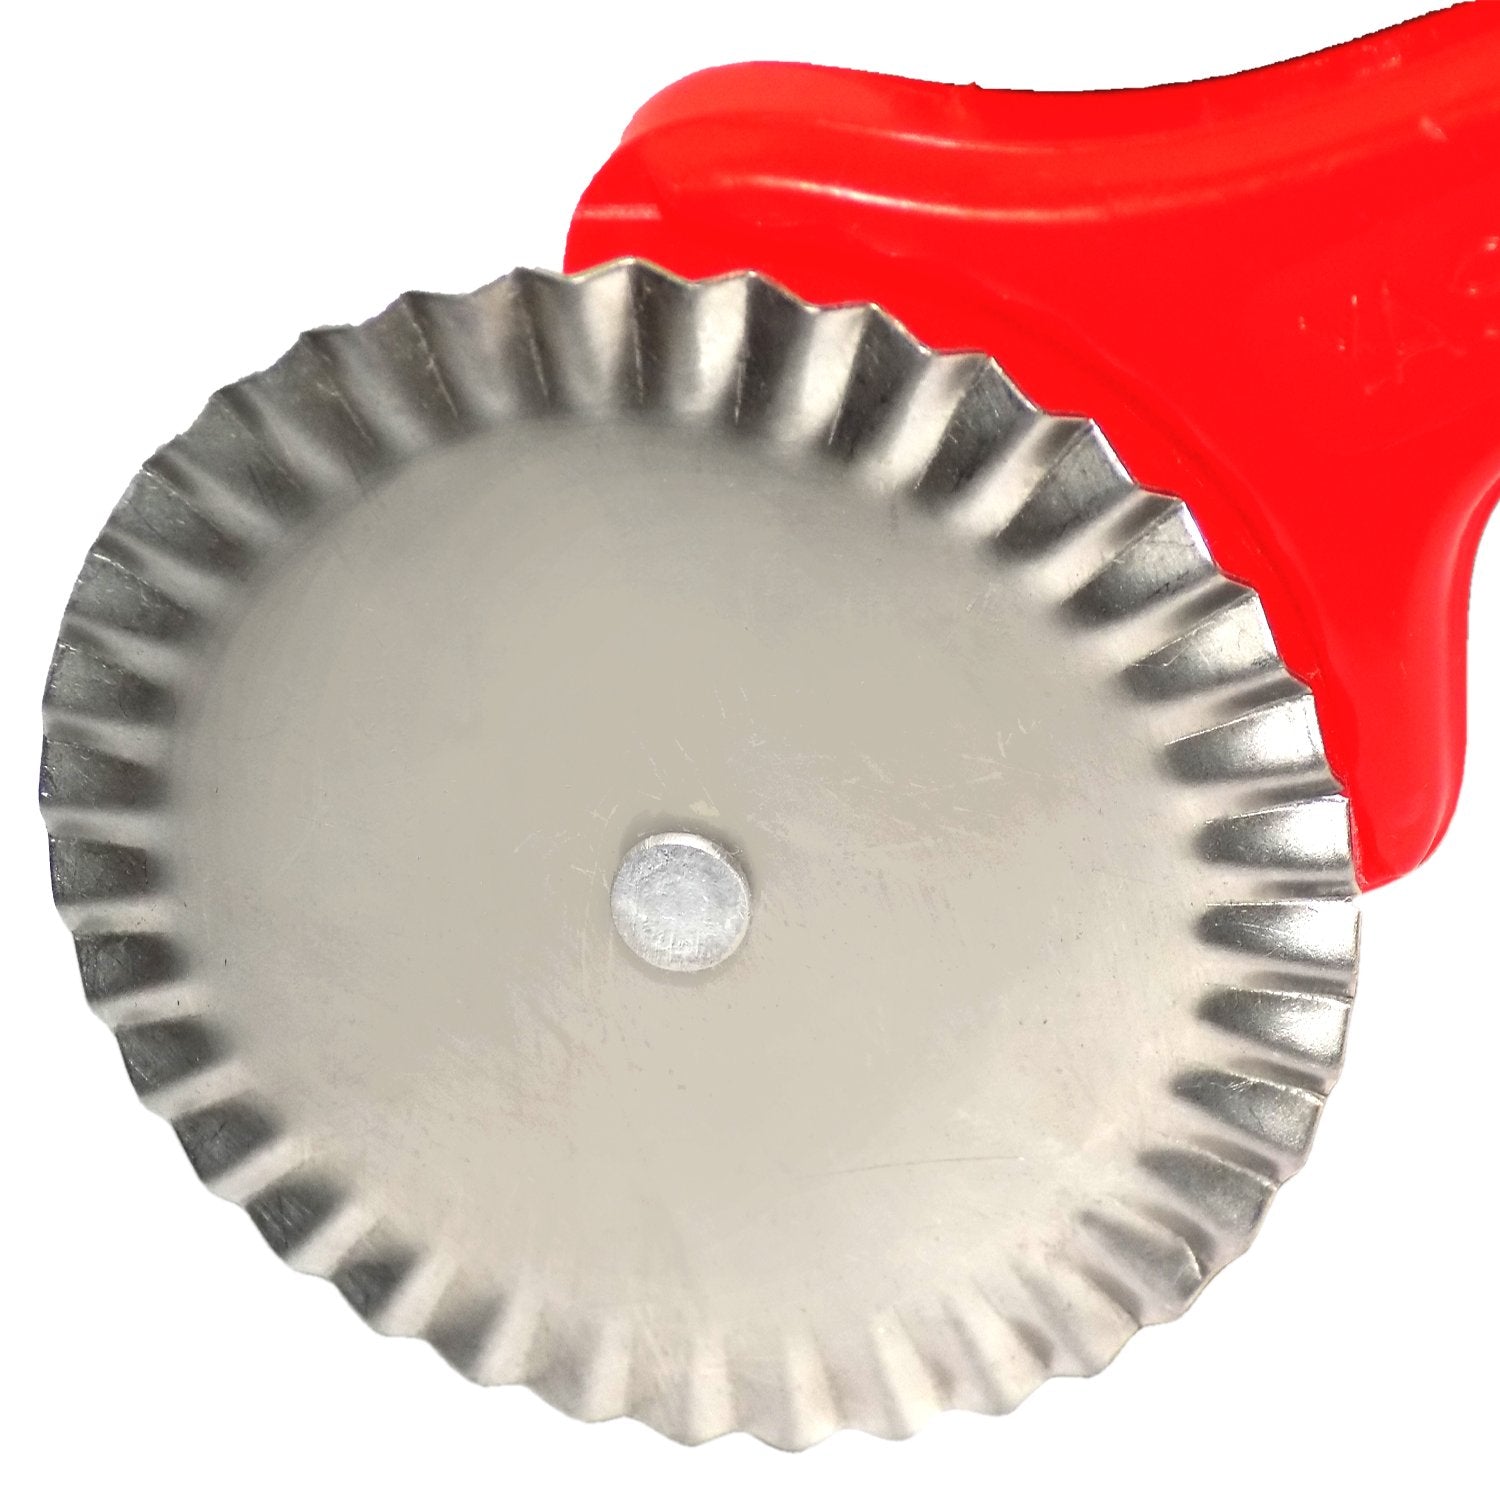 0725 Stainless Steel Pizza Cutter/Pastry Cutter/Sandwiches Cutter - SkyShopy